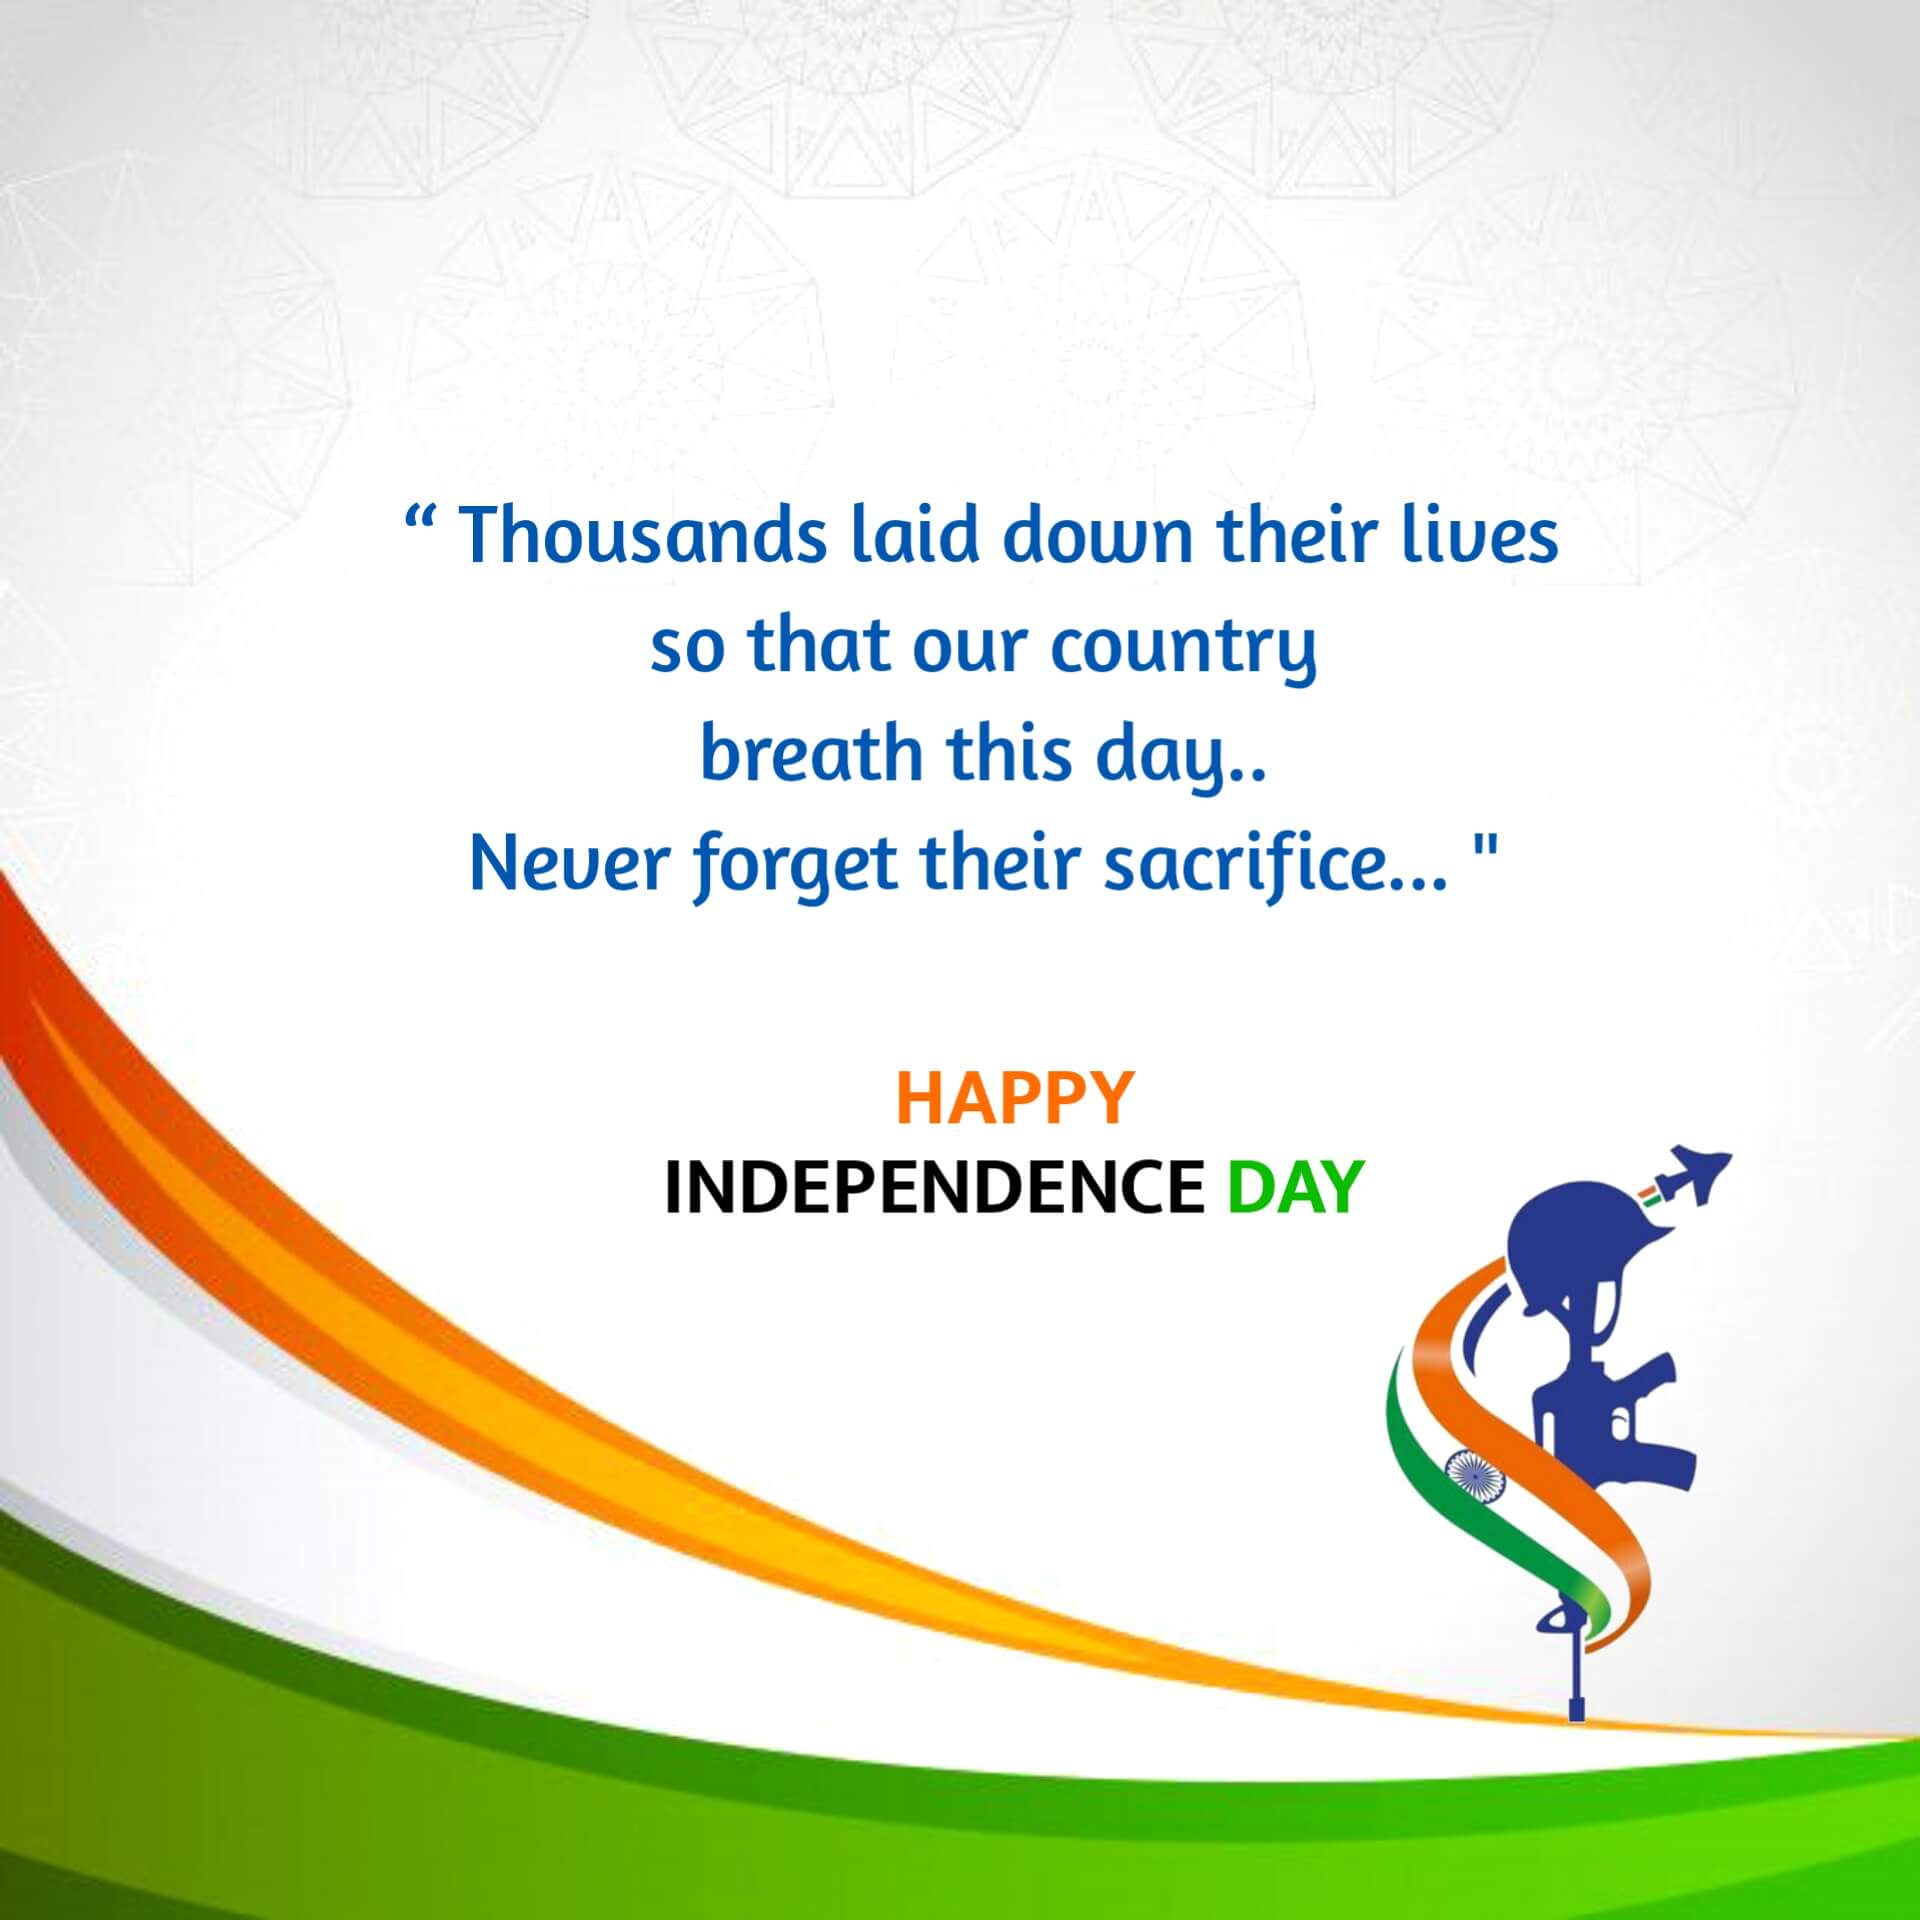 India Independence Day Image with Quotes